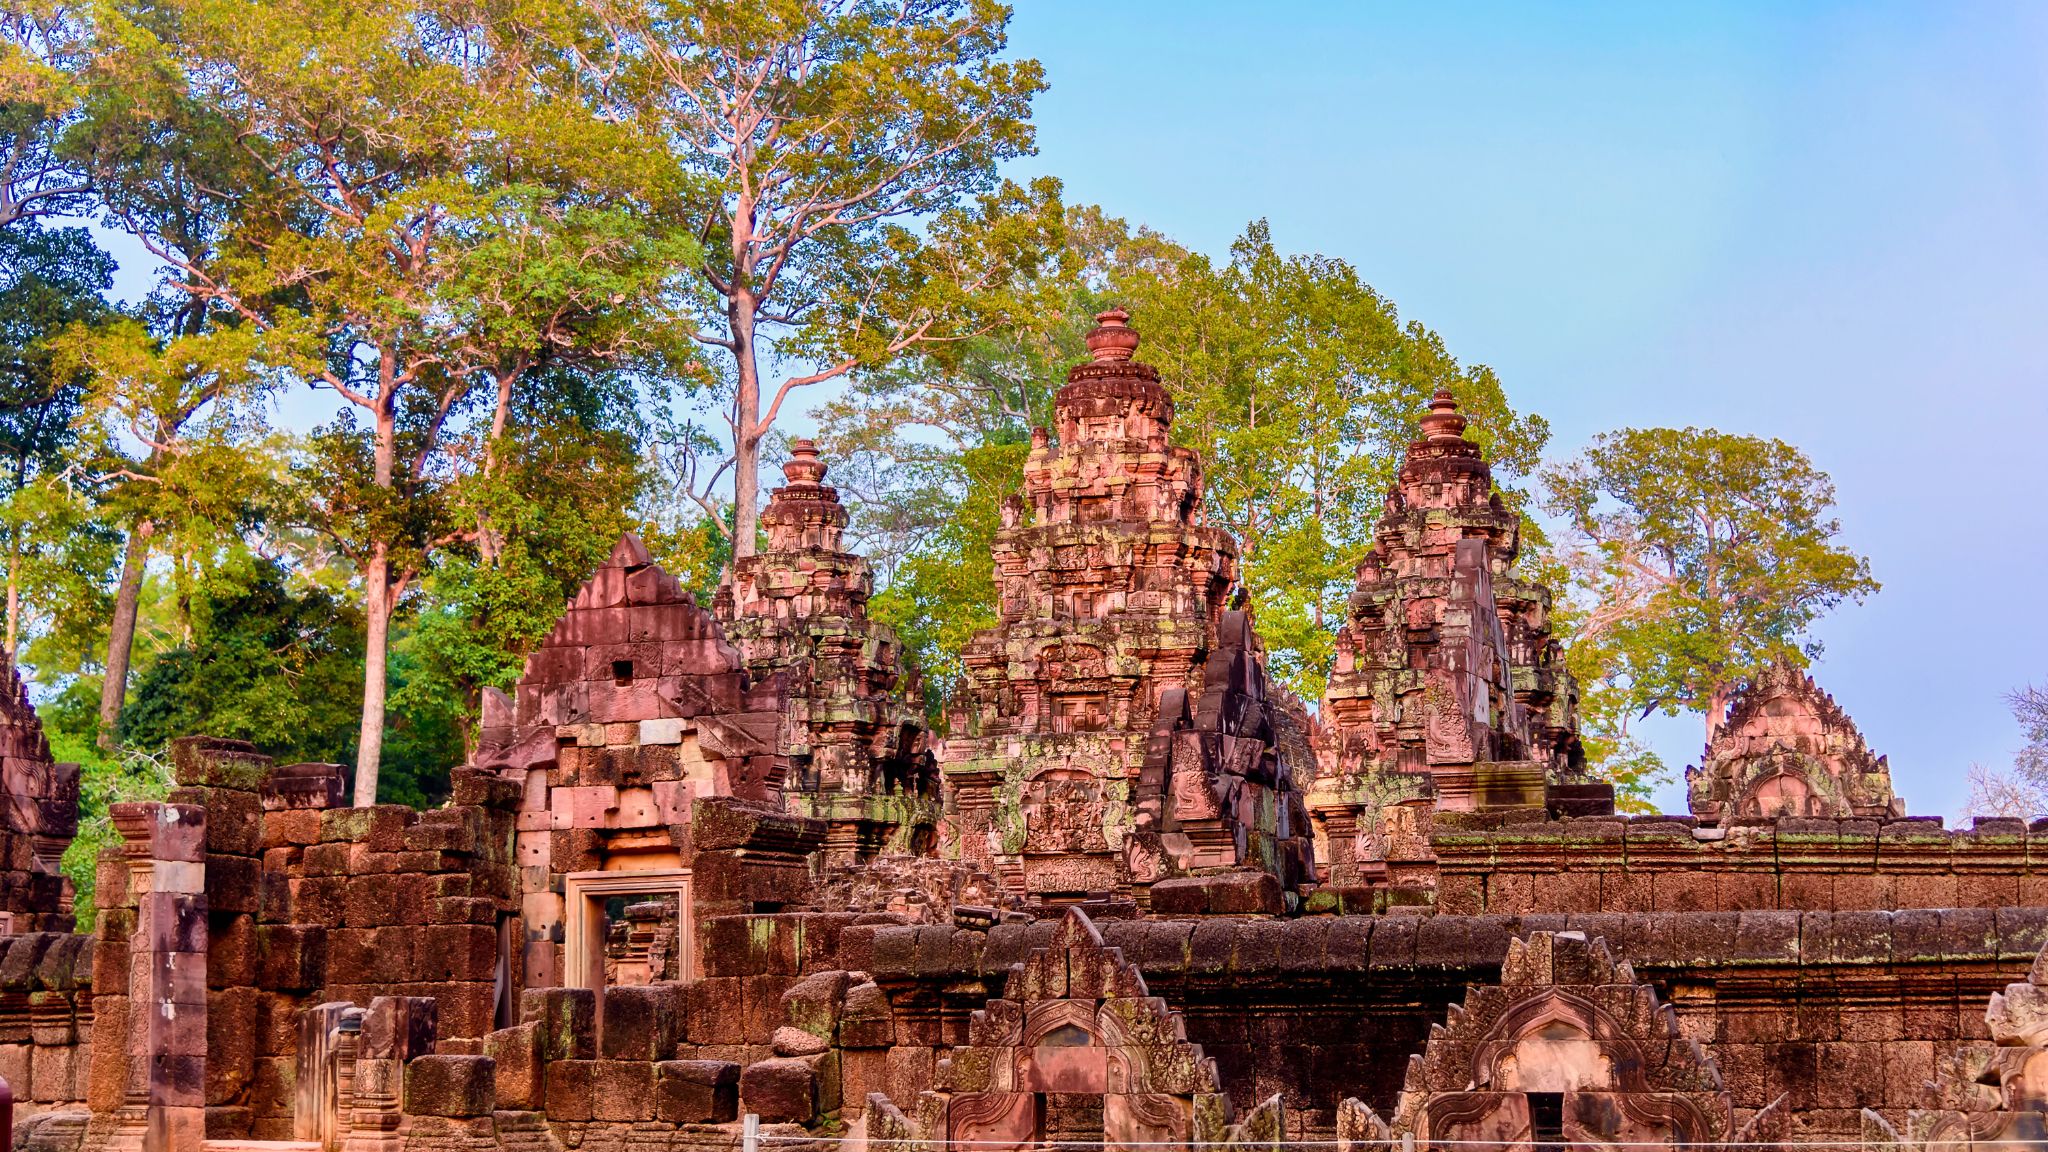 Day 3 Visit Banteay Srei Temple, One Of The Most Beautiful Temples In Cambodia